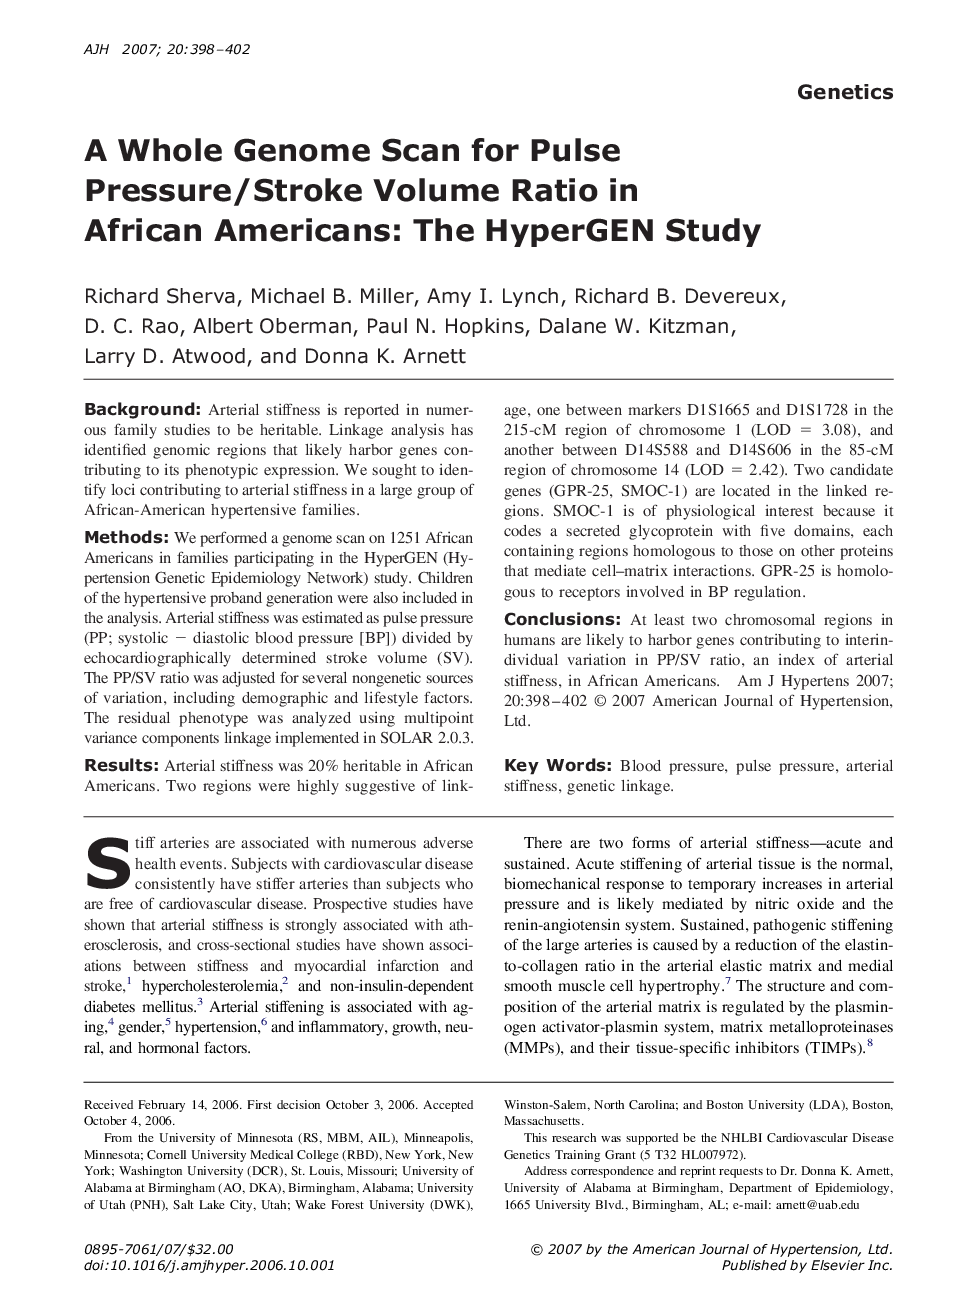 A Whole Genome Scan for Pulse Pressure/Stroke Volume Ratio in African Americans: The HyperGEN Study